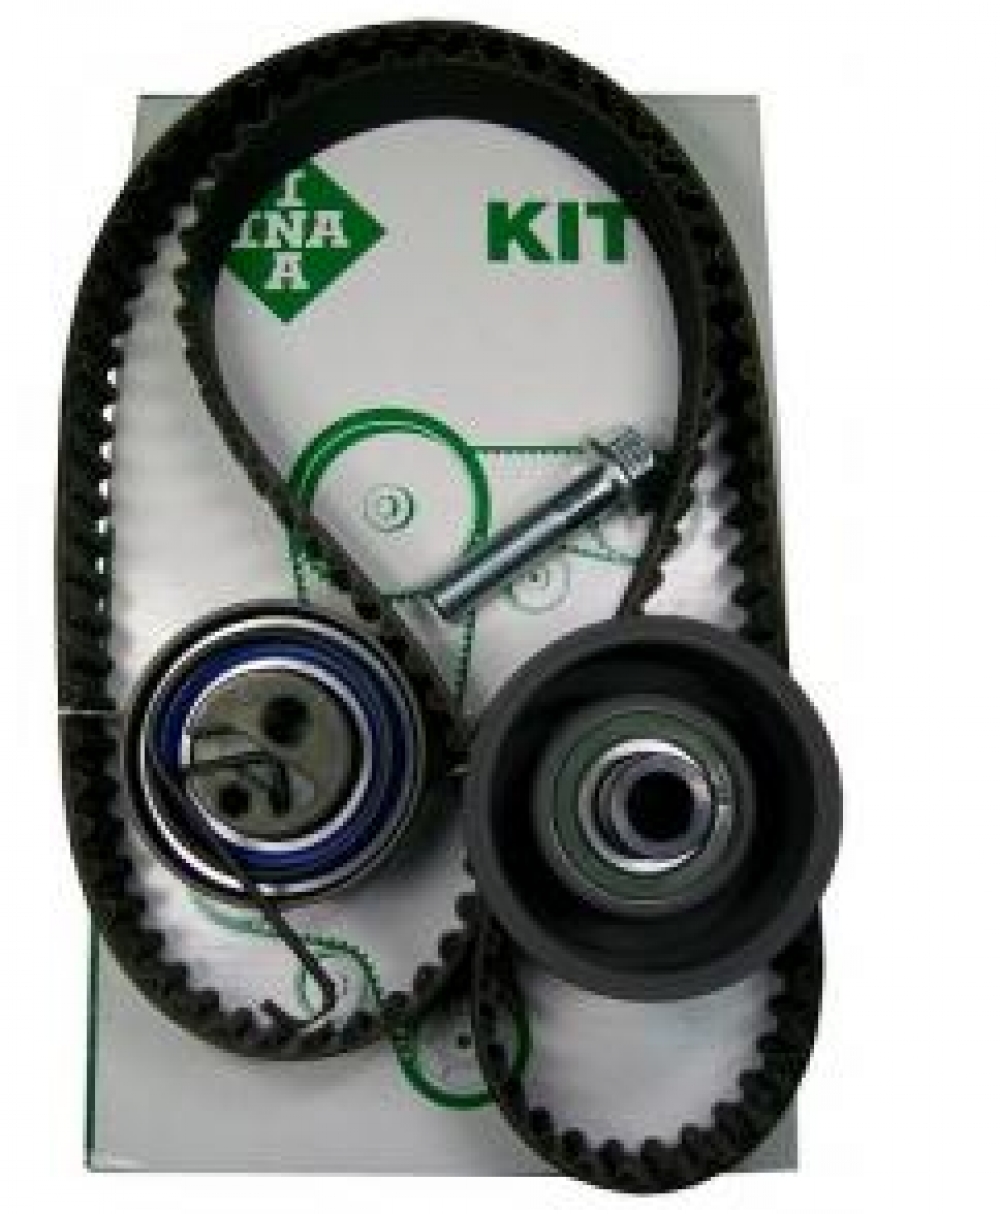 Kit distributie Opel Astra G Y17DT INA Pagina 2/opel-corsa-c/opel-agila/ford-mustang - Kit distributie Opel Astra G